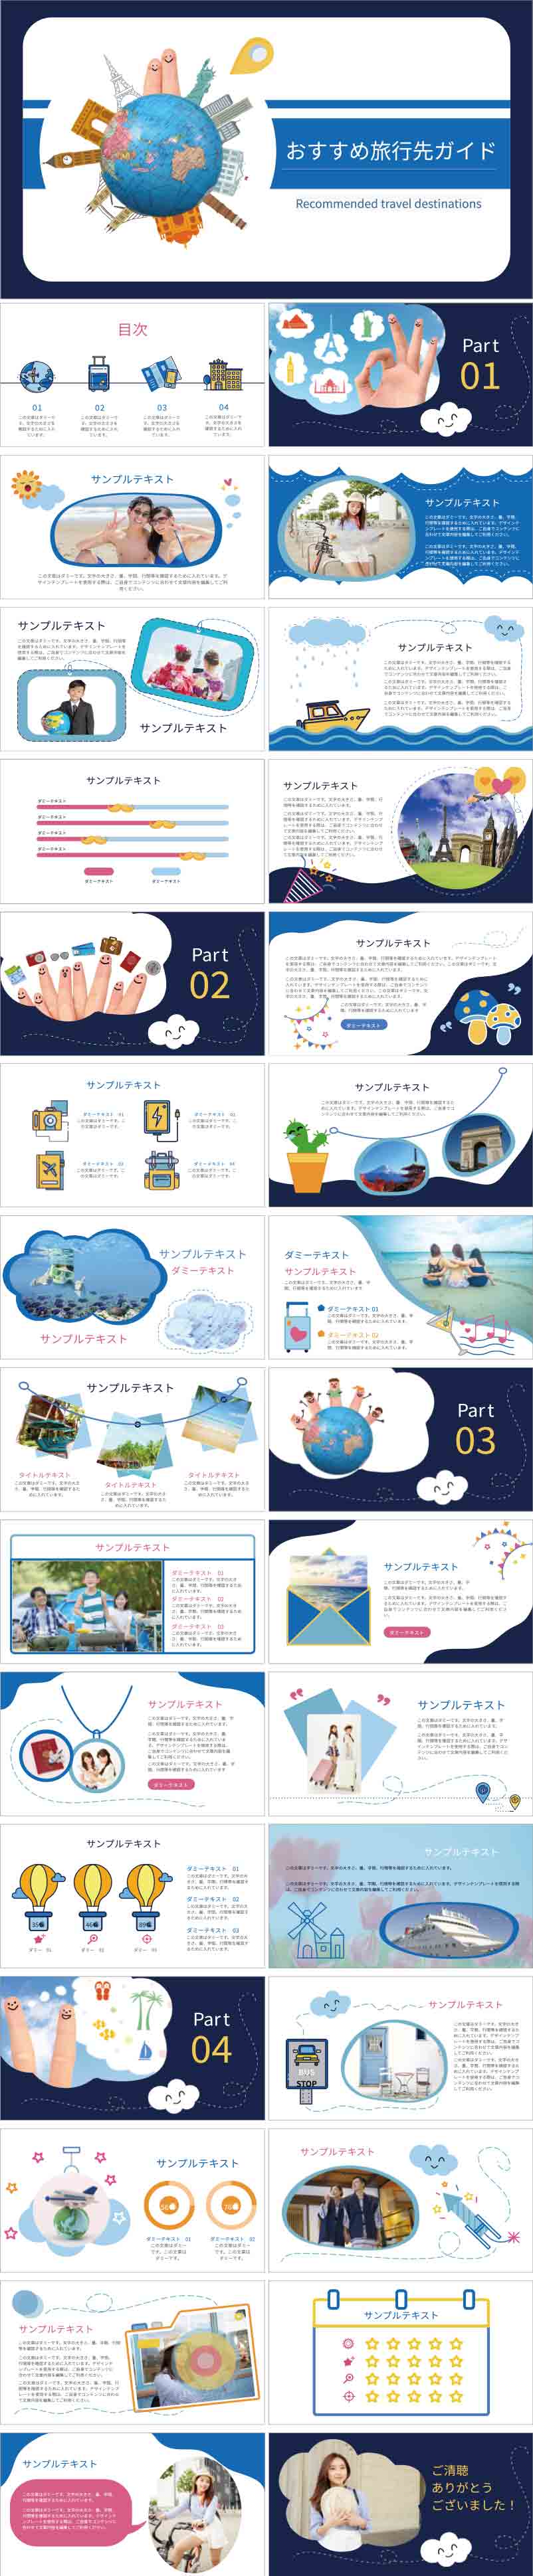 PowerPoint template vol.65